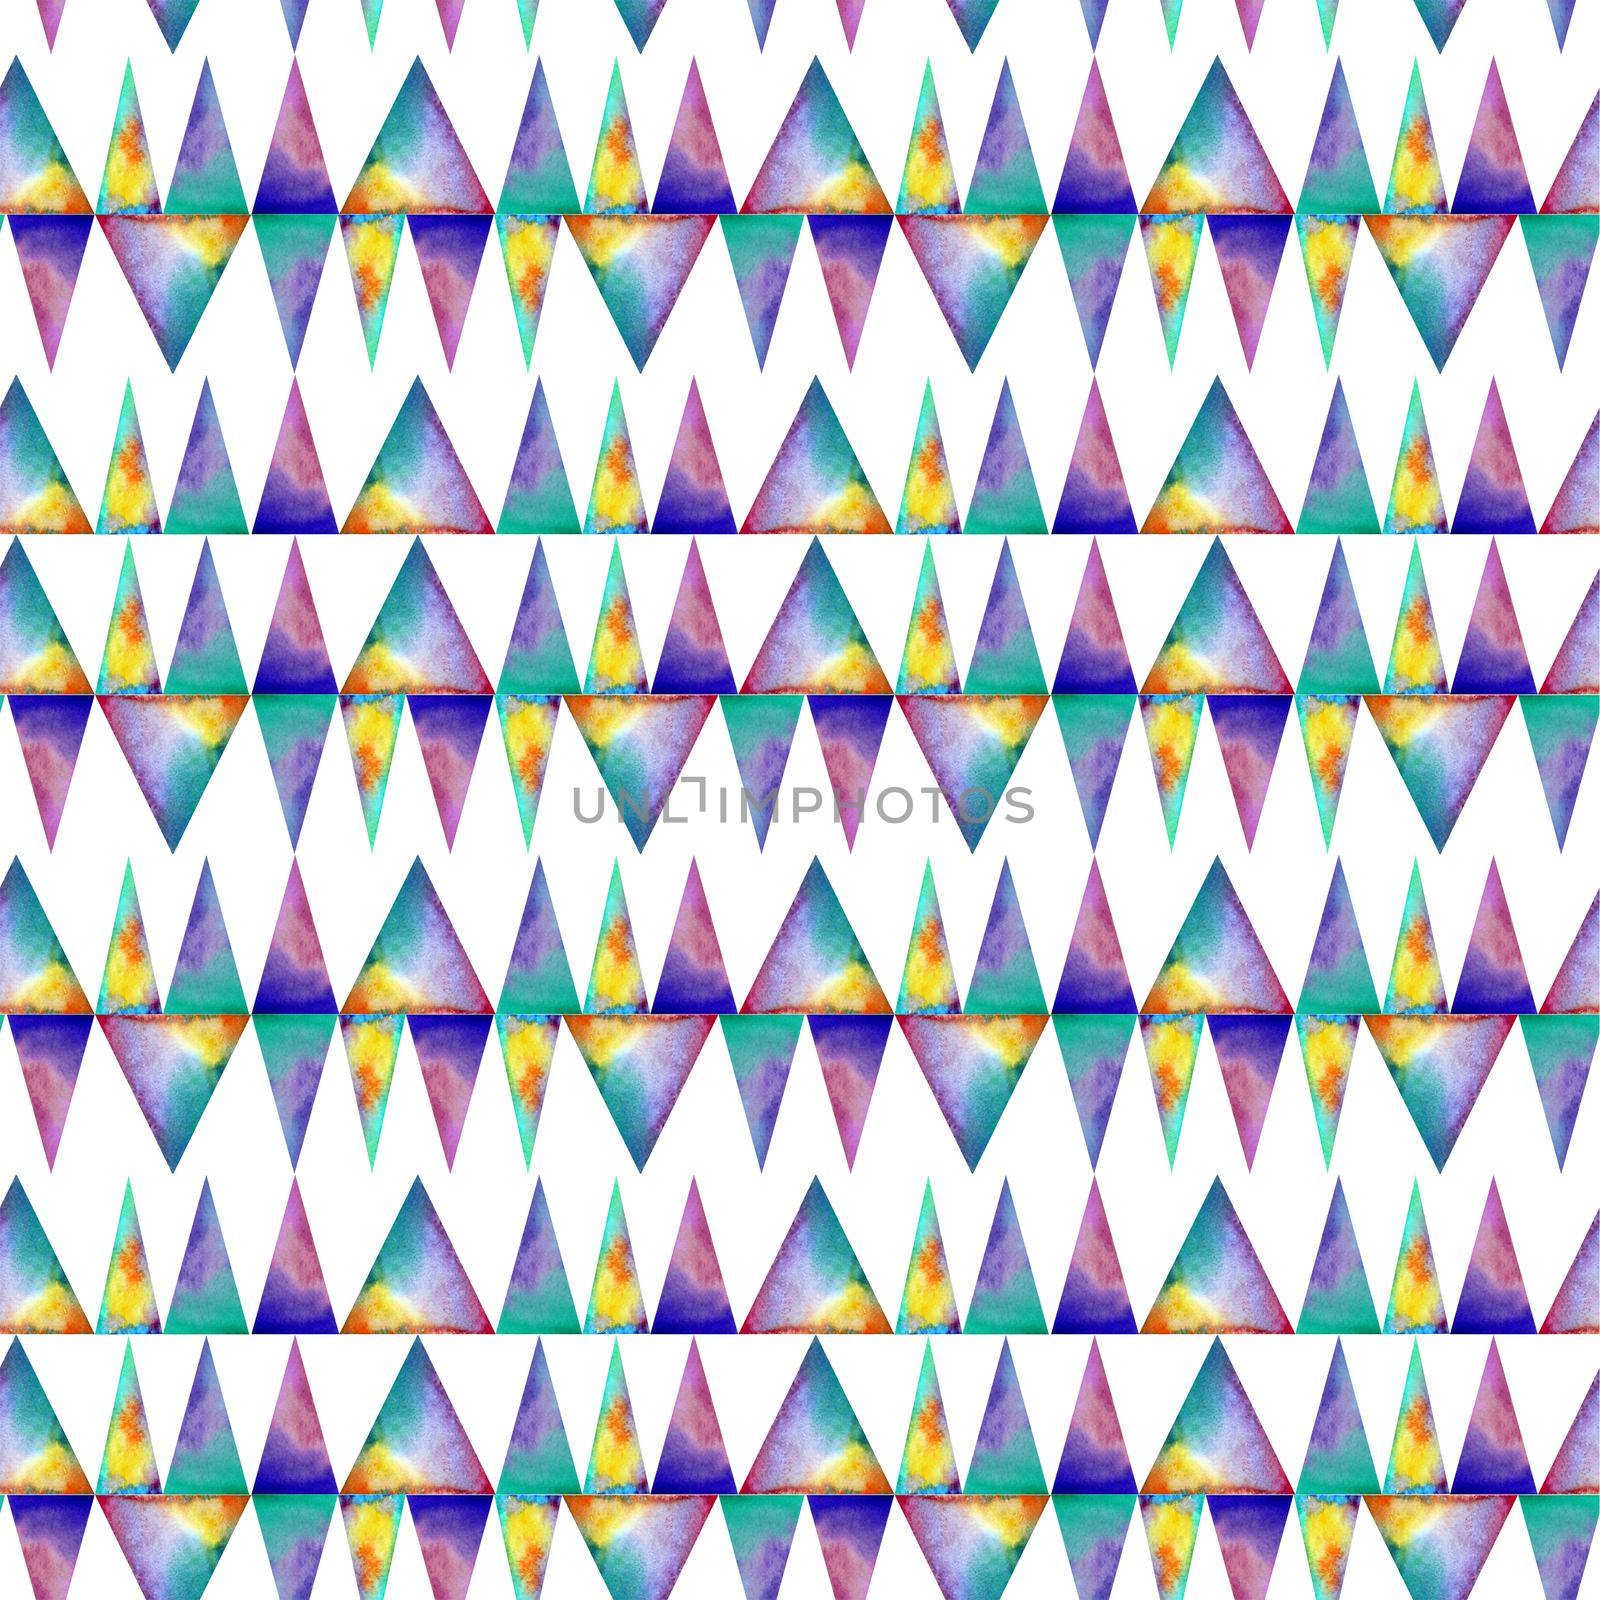 Watercolor seamless pattern. With colofrul triangles on white background by DesignAB